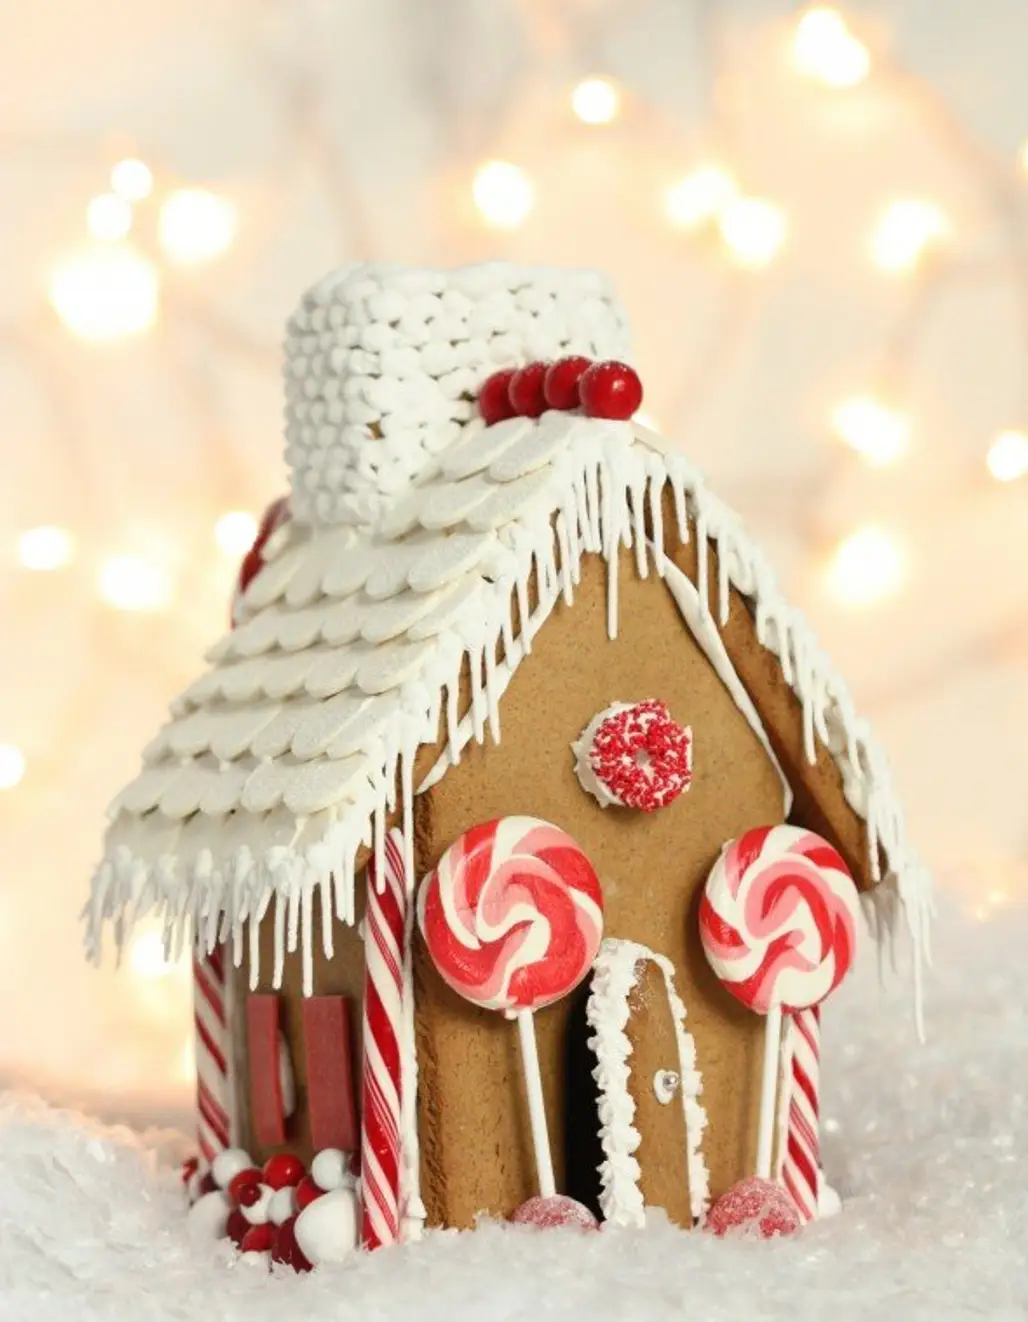 Compete with Gingerbread Houses